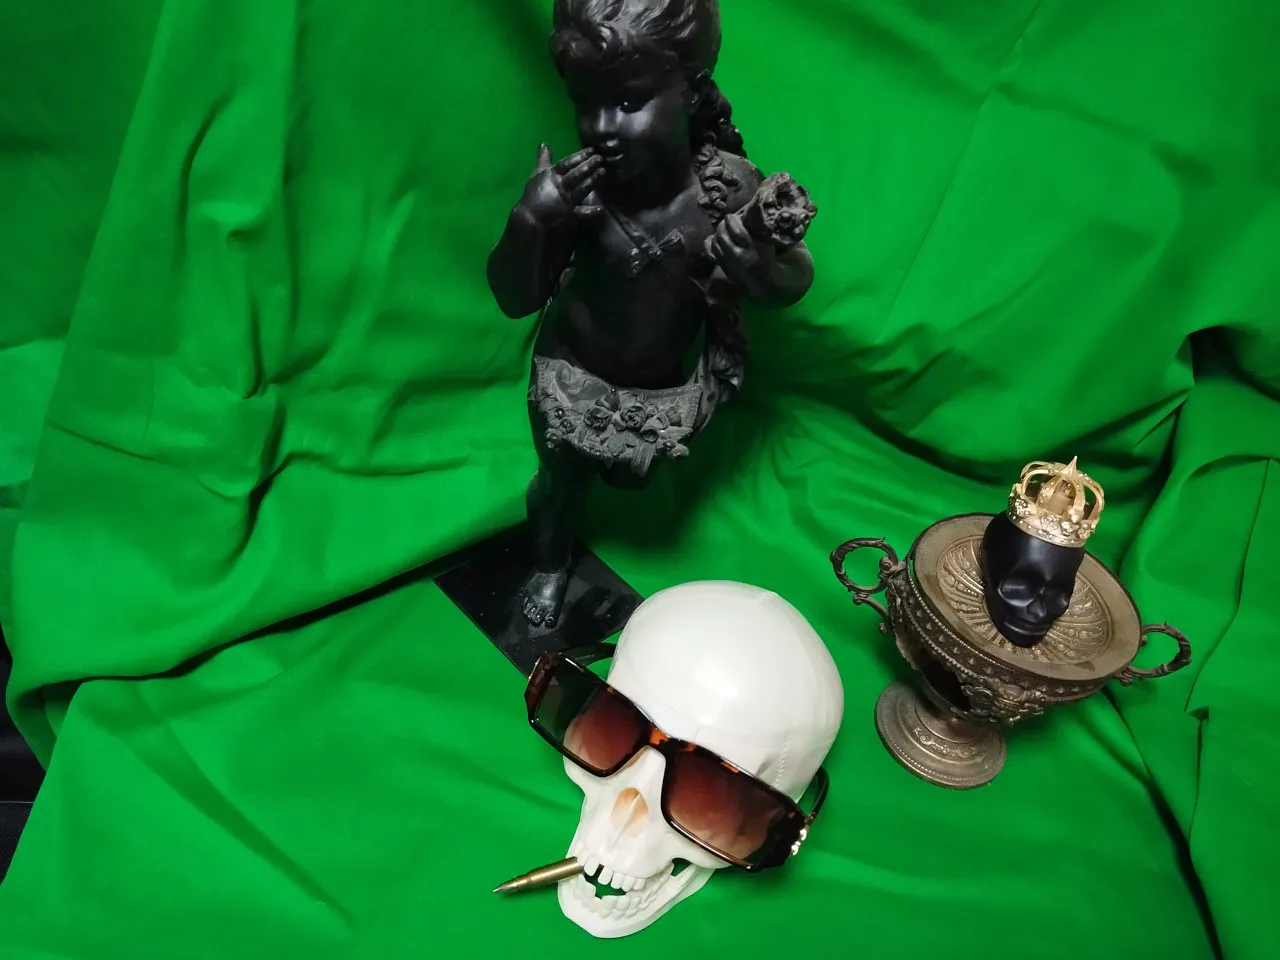 a pair of sunglasses and a fake plastic skull head on a green cloth